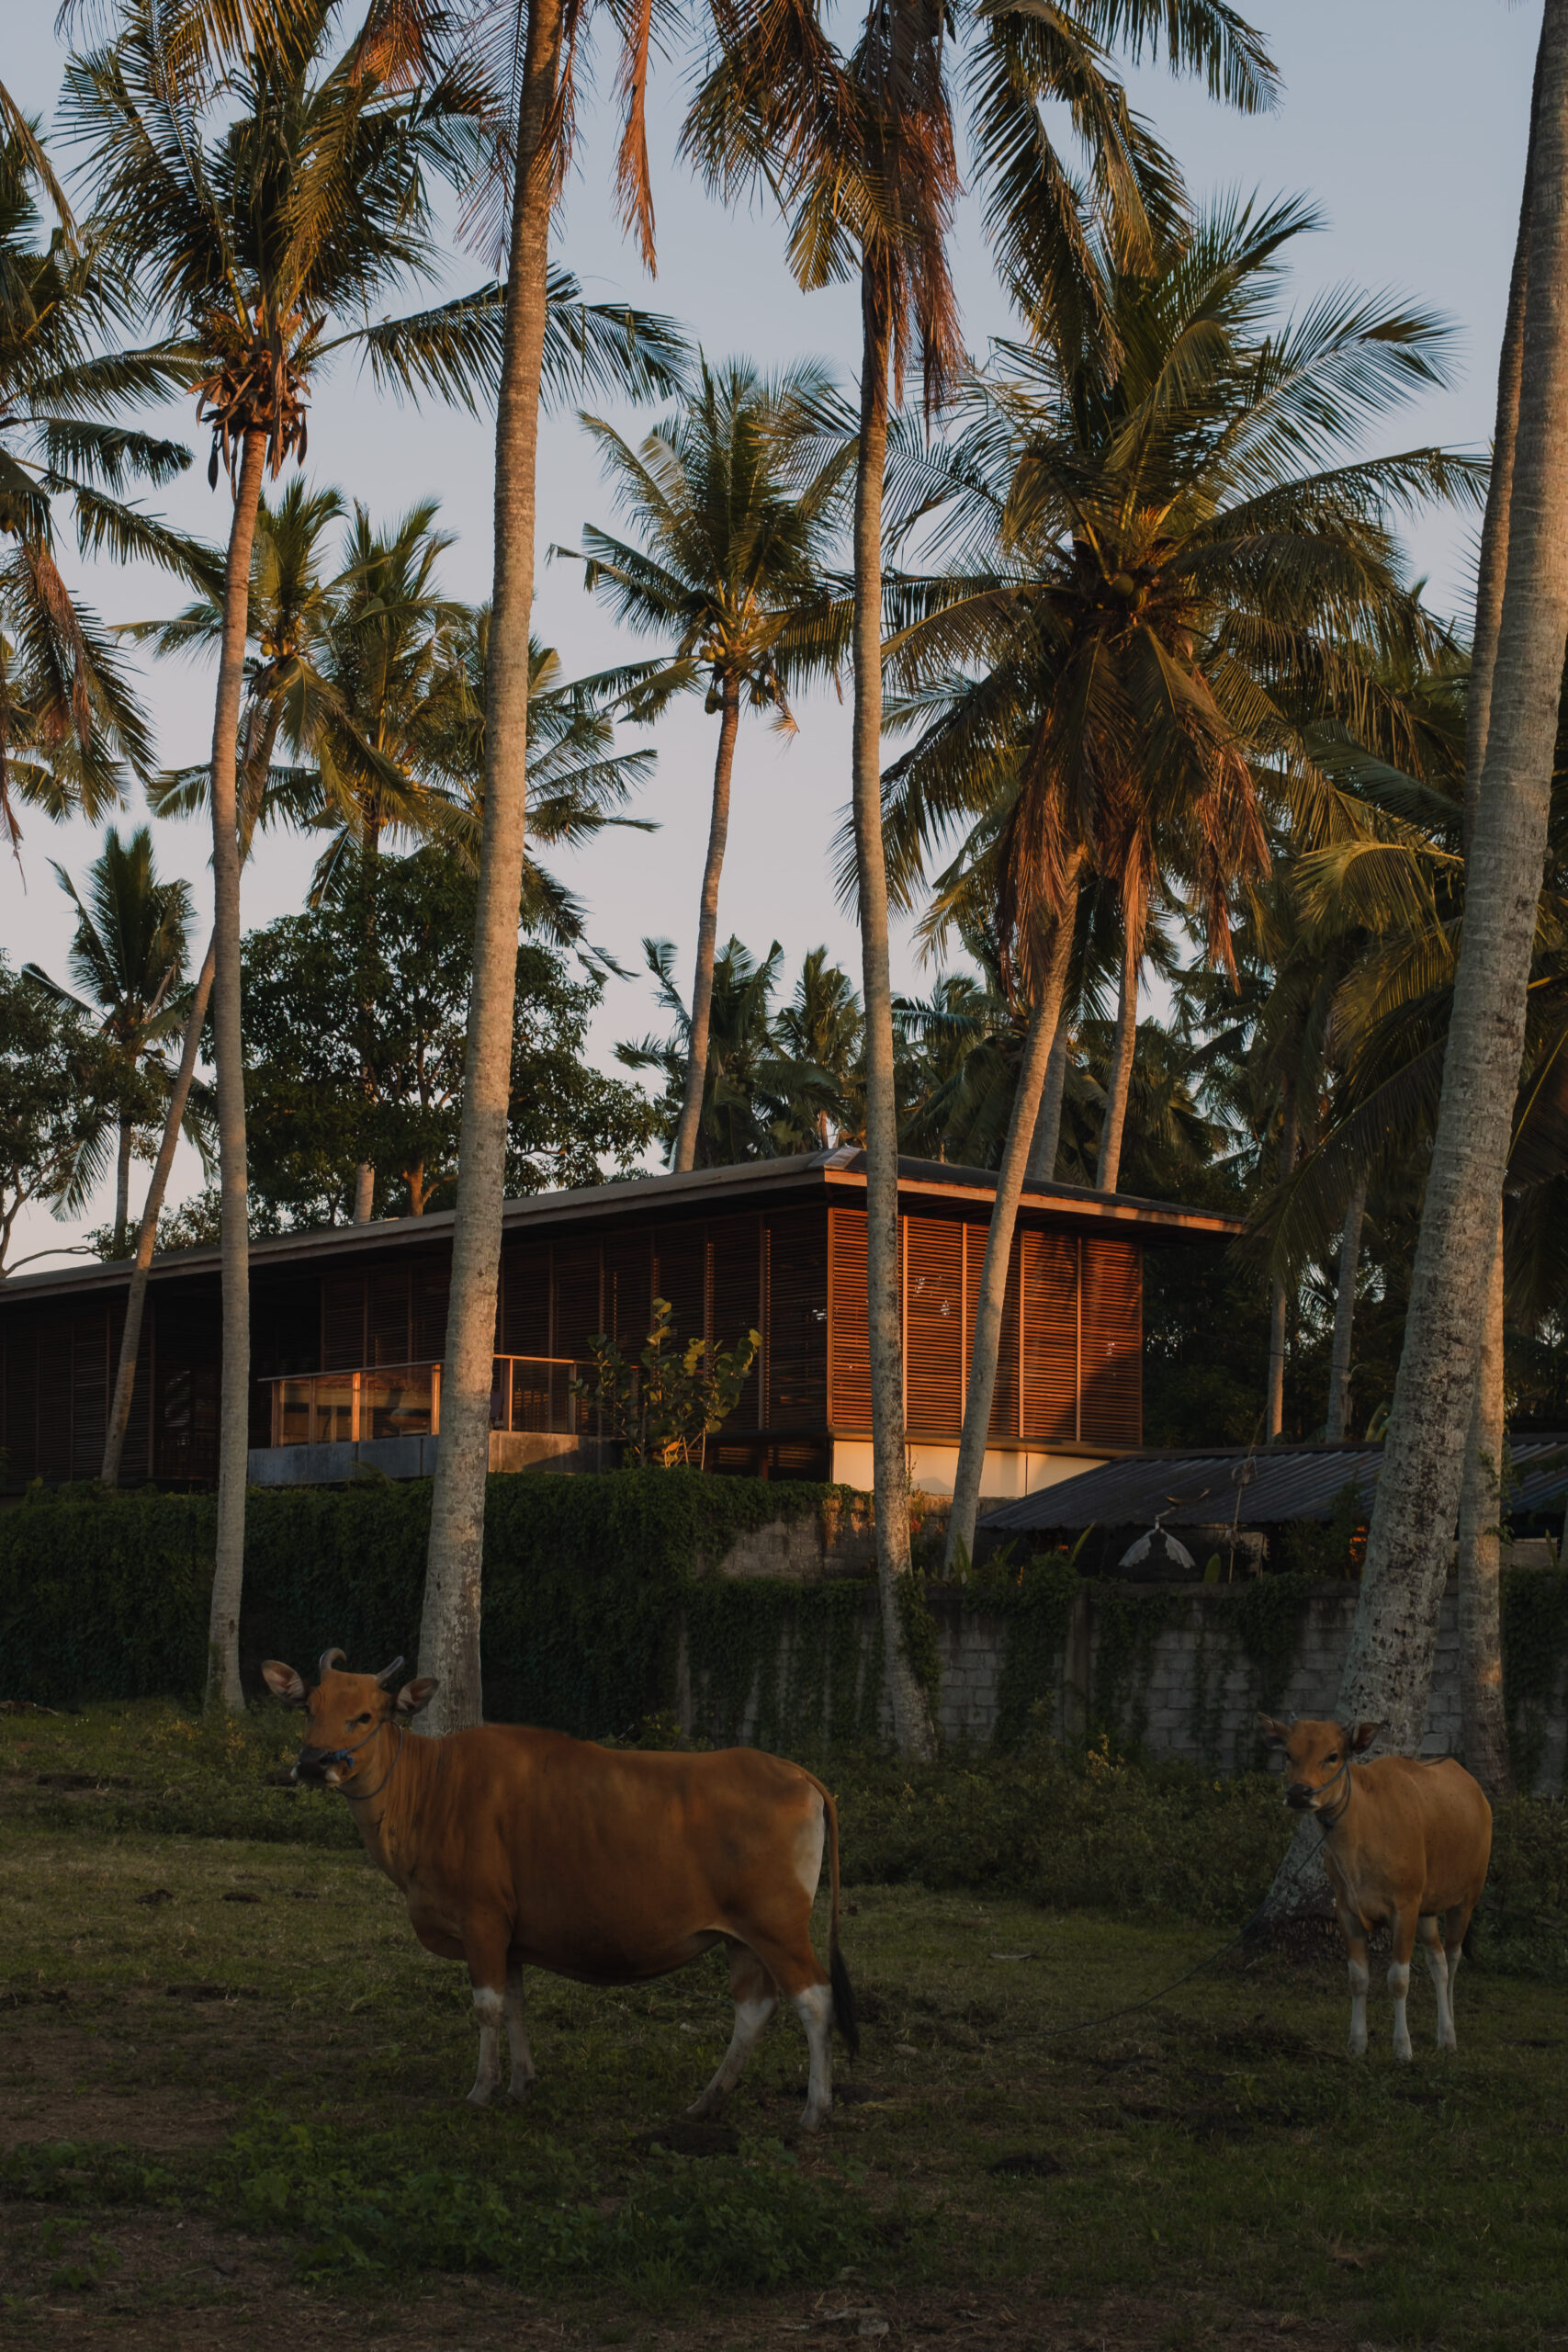 Back elevation of Rumah Amadangi with cows in the foreground